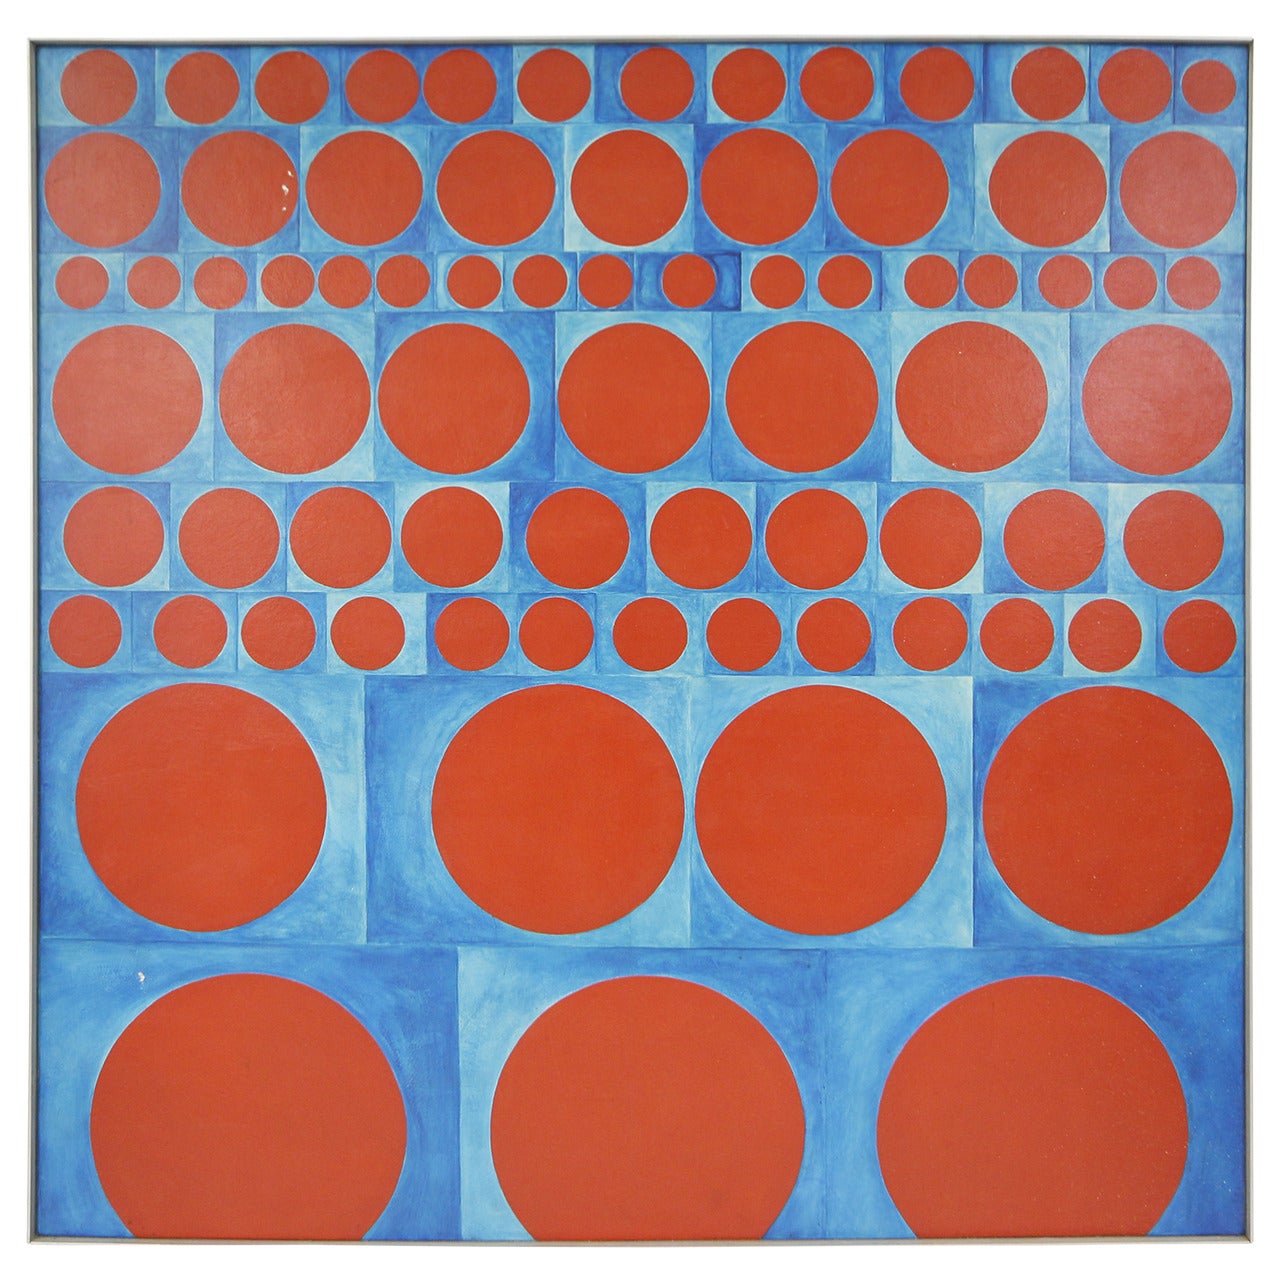 Large Mid-Century Modern Oil on Wood Painting by Fargotstein, 1968